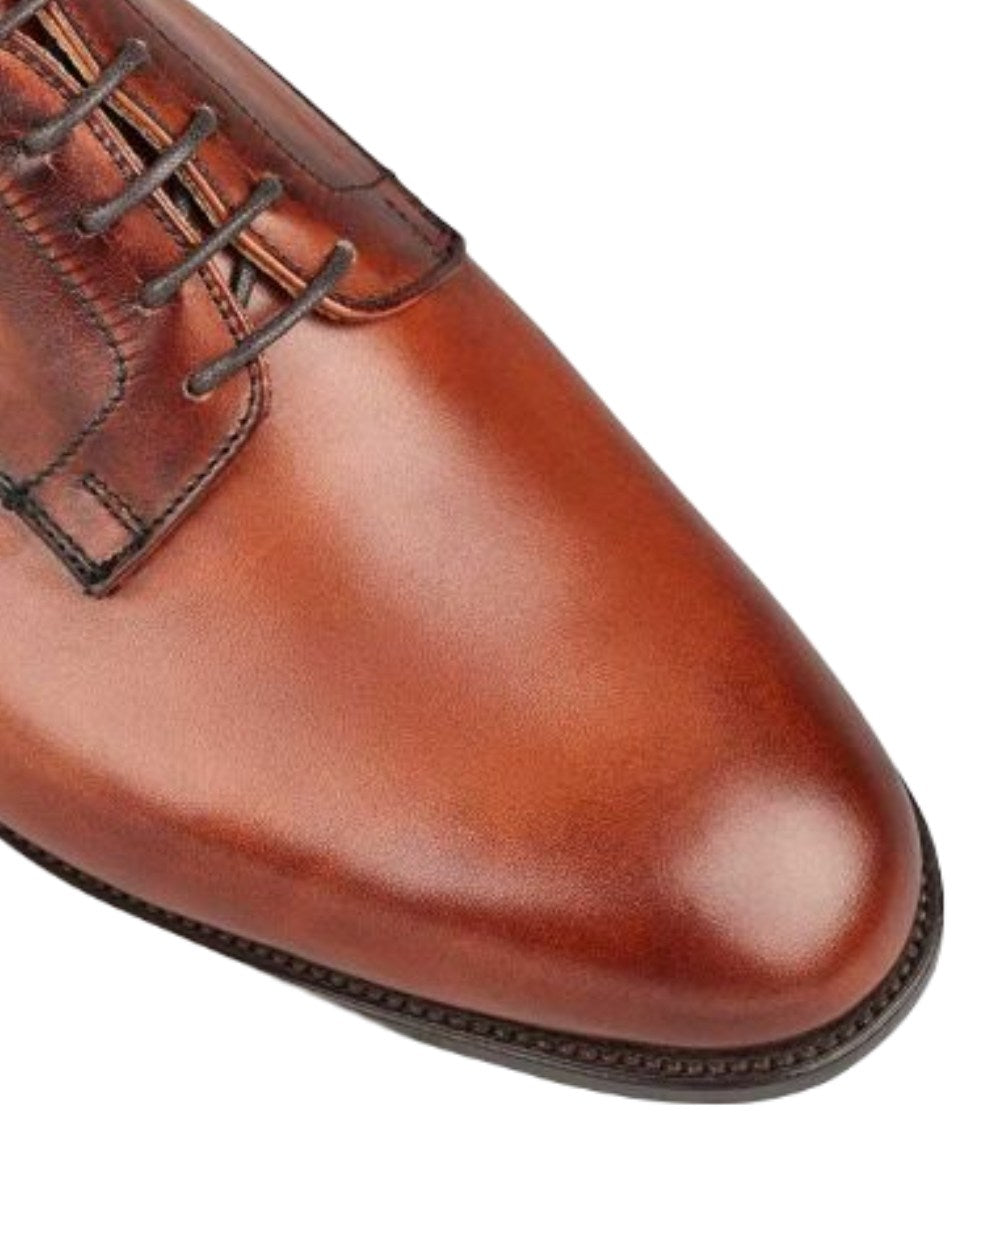 Chestnut Coloured Trickers Wiltshire Plain Derby City Shoe On A White Background 